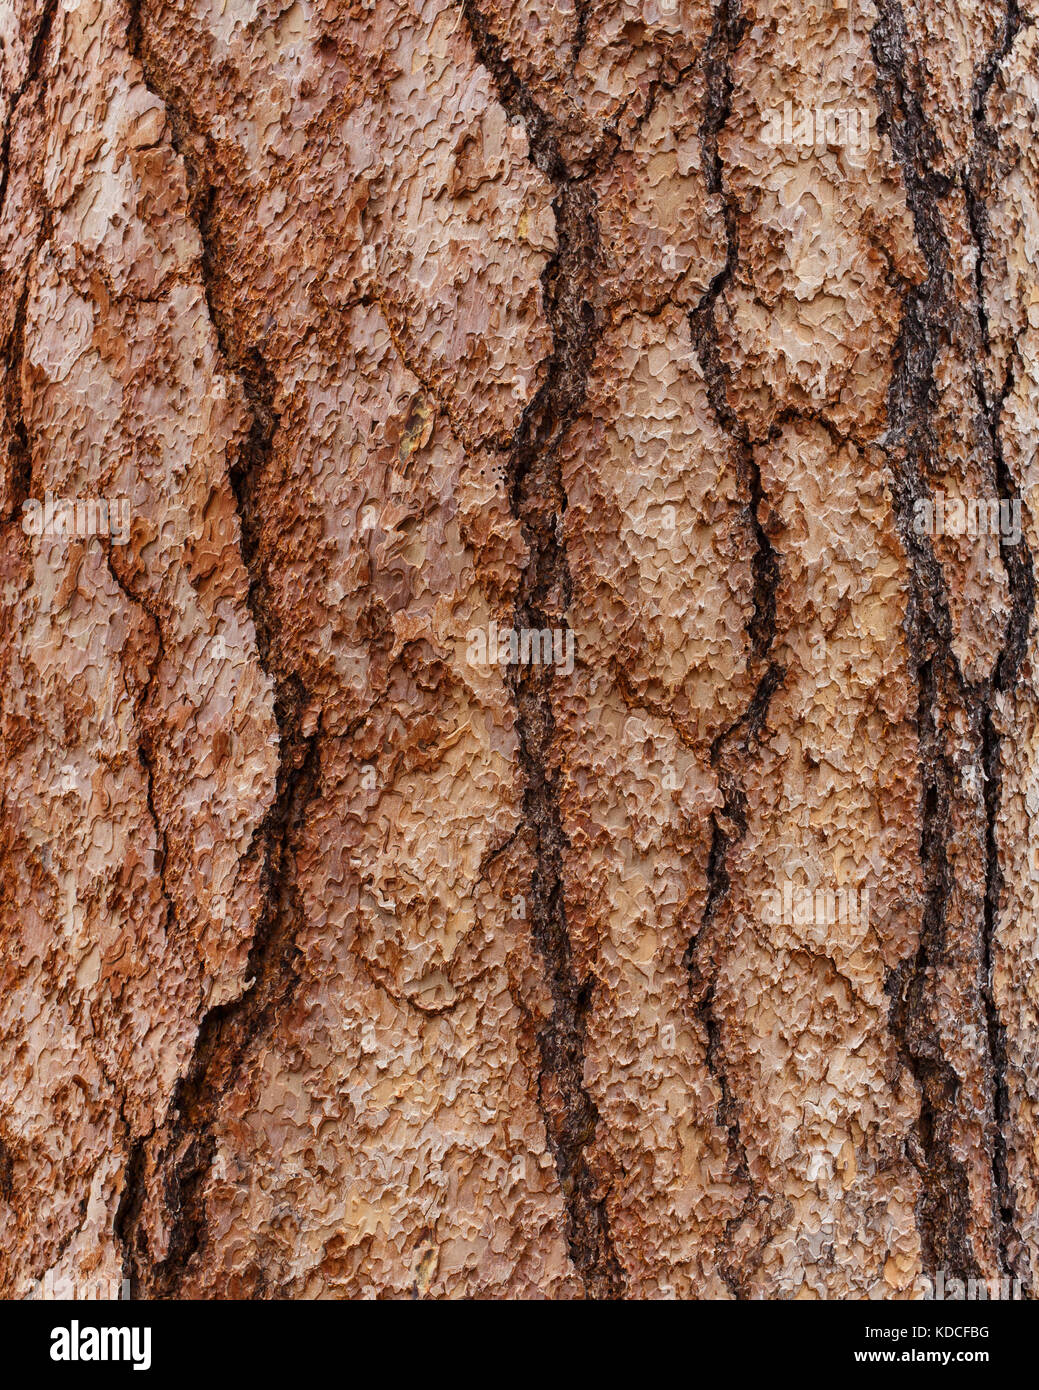 Close-up view of Ponderosa Pine Bark on a large tree showing varied patterns and cracks. Stock Photo